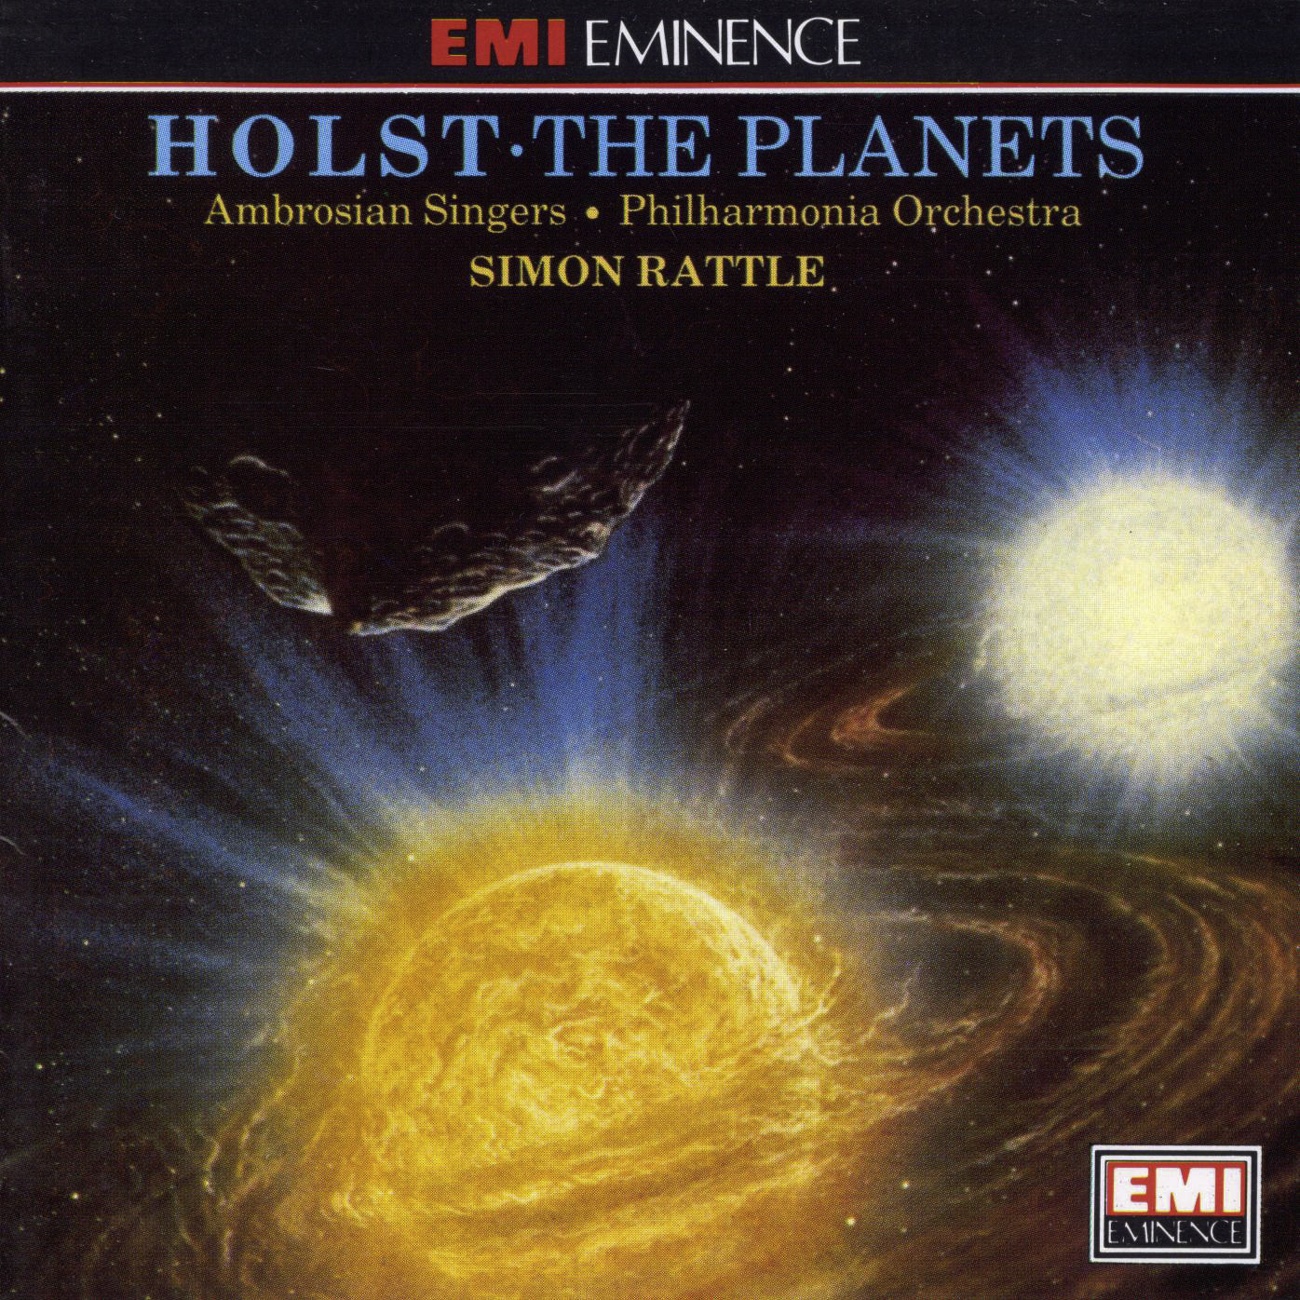 The Planets, Op. 32: 7. Neptune, the Mystic (Andante)